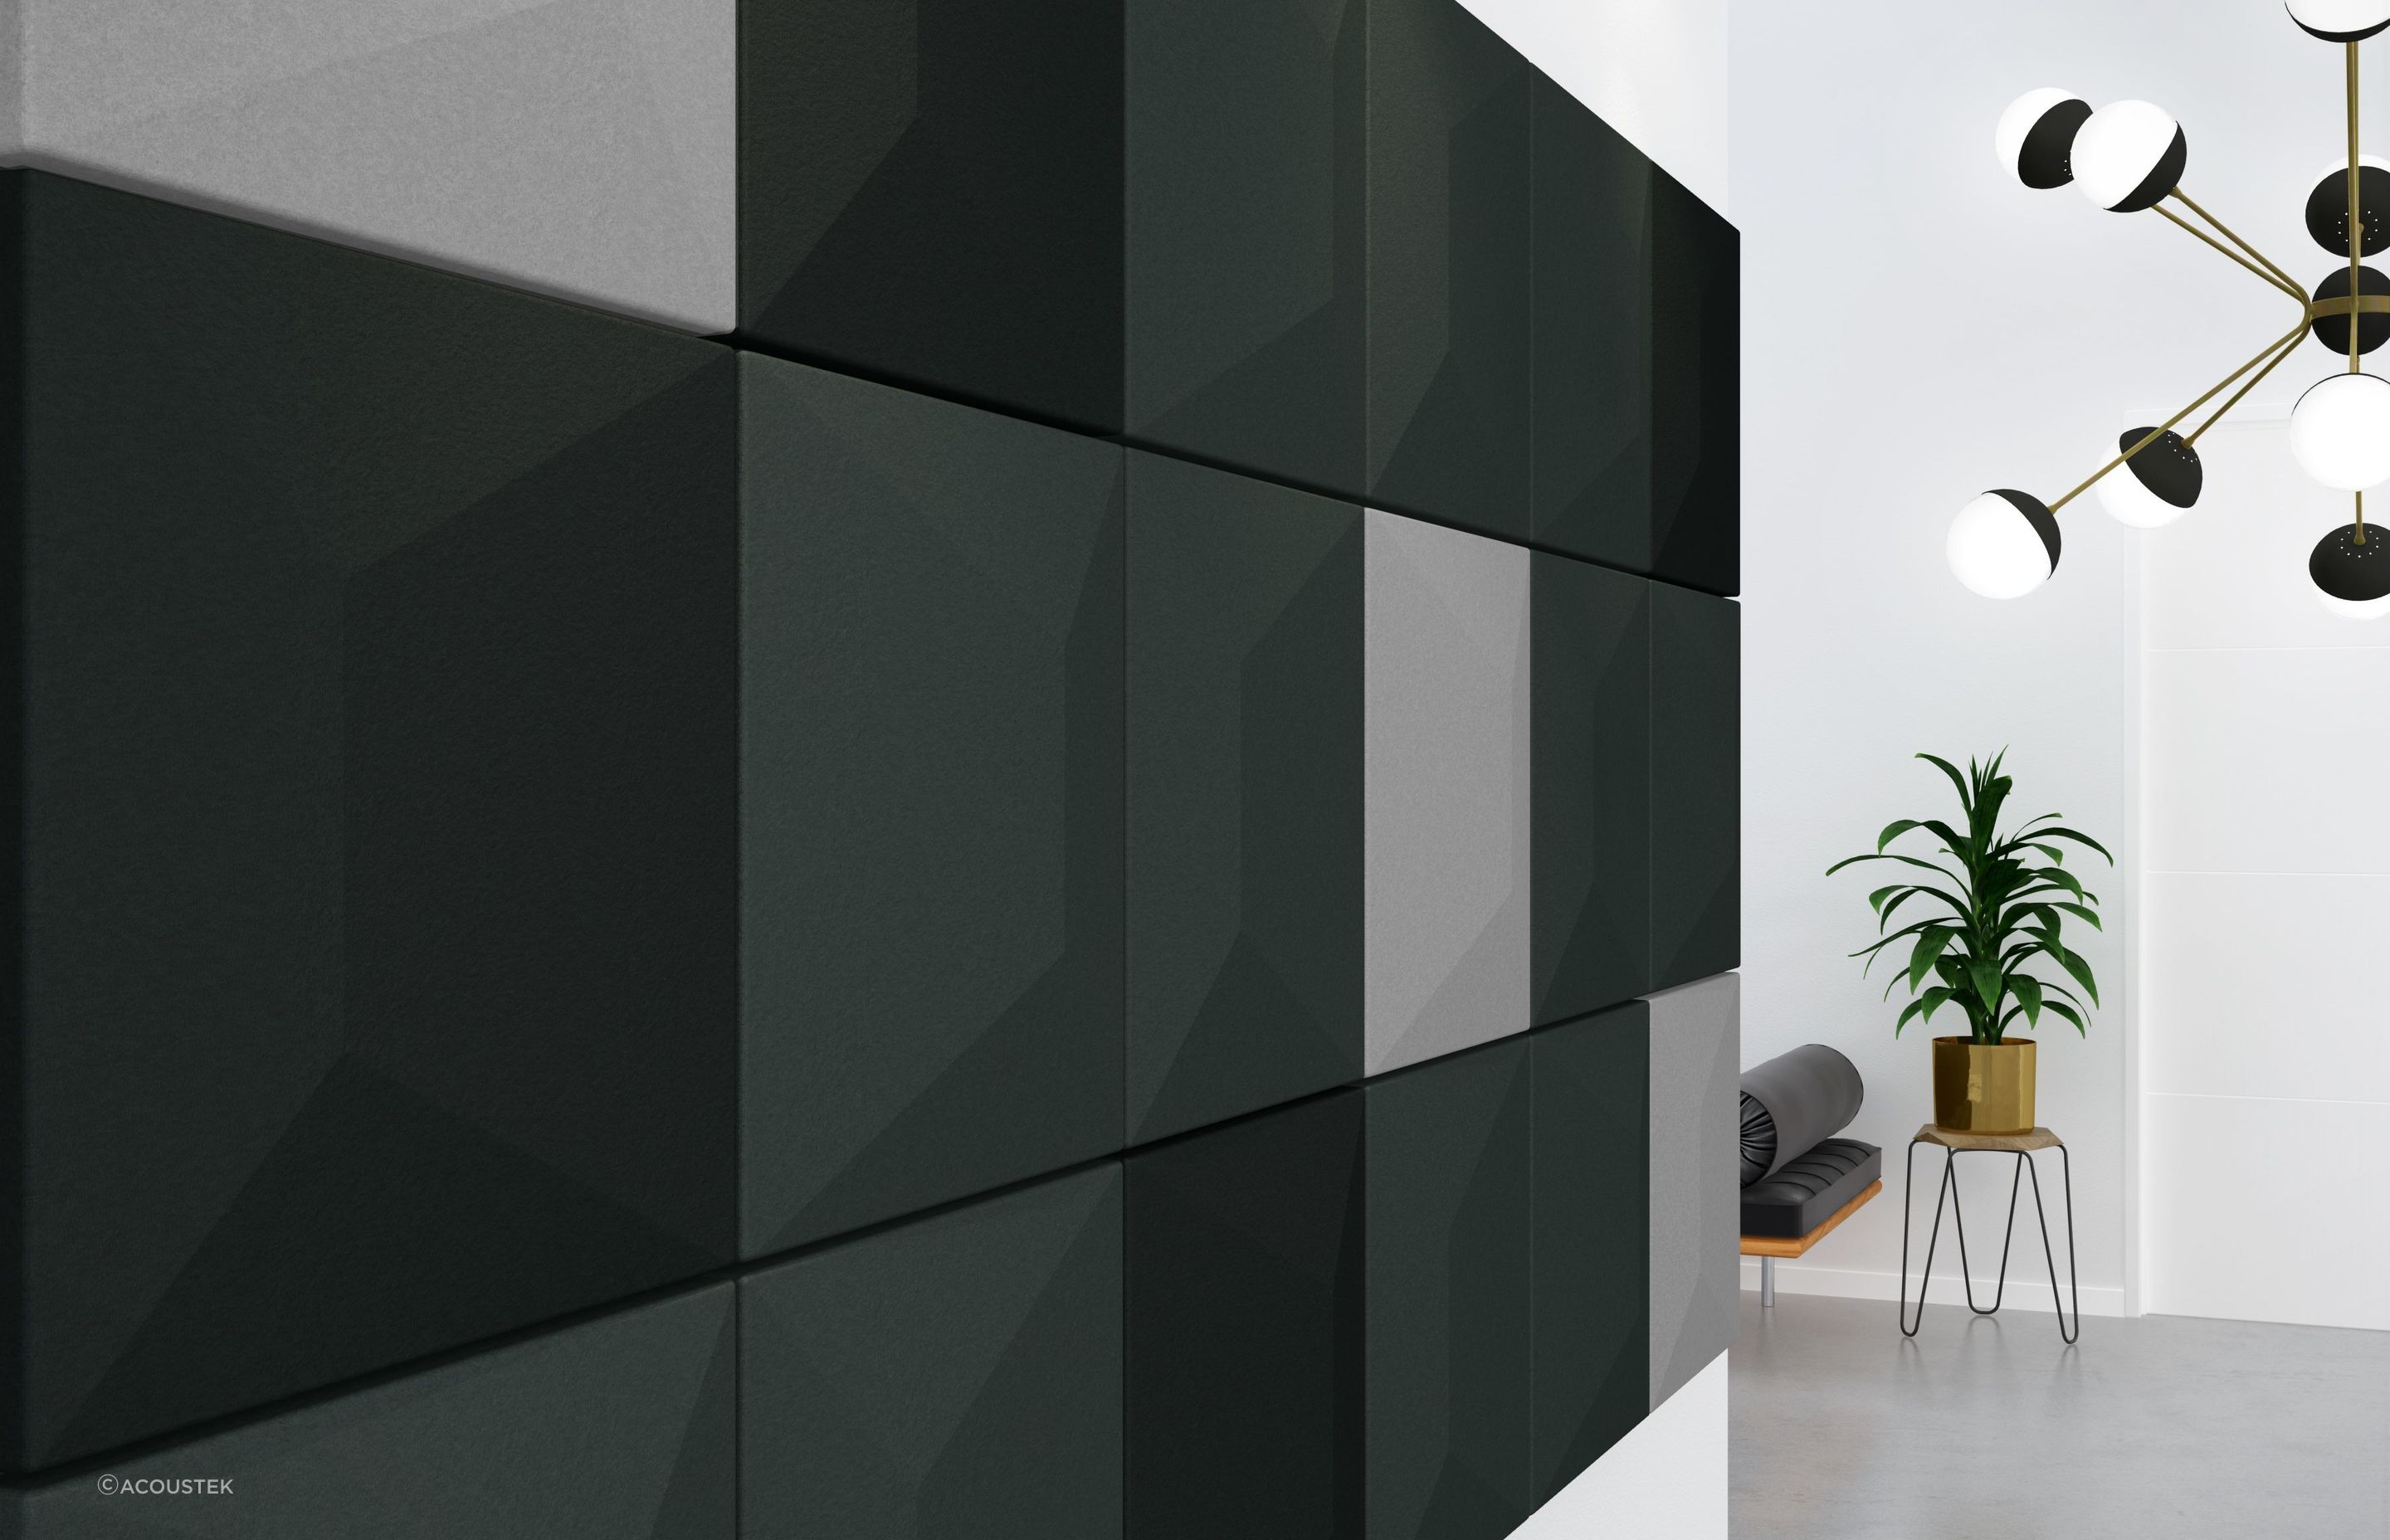 Installing acoustic panels or tiles can be done with a DIY approach or through professional installation.